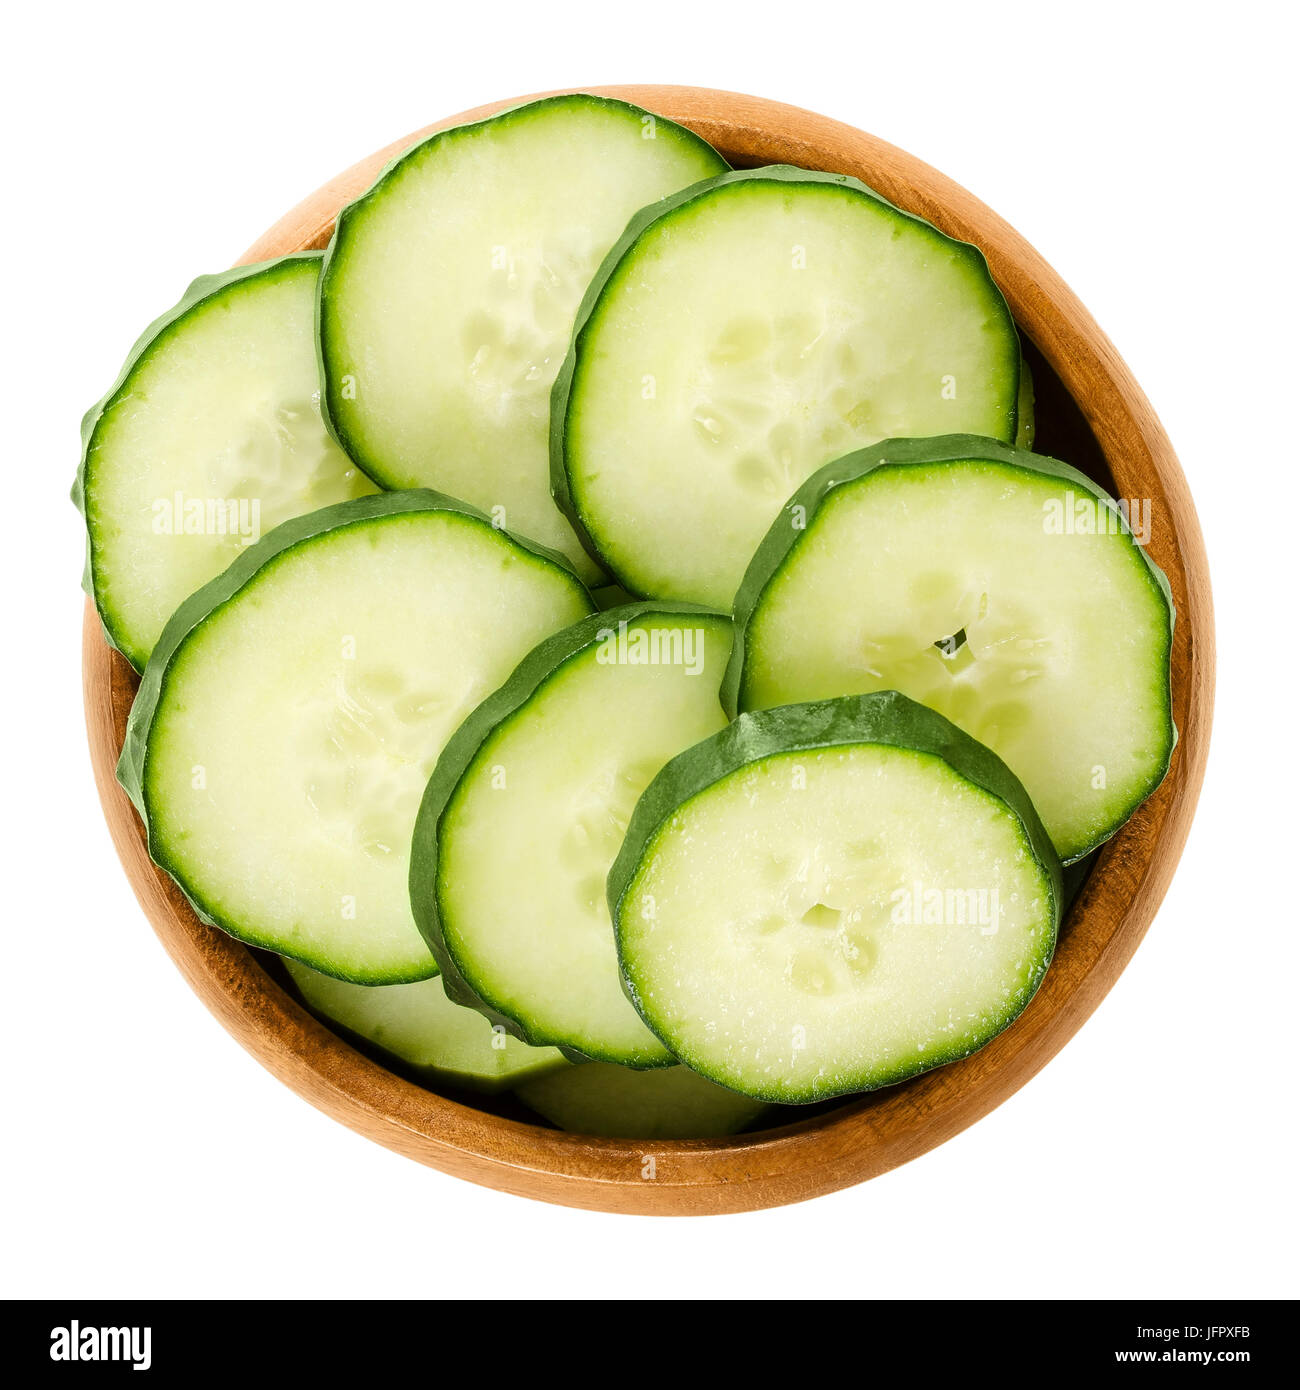 Cucumber slices in wooden bowl. Cucumis sativus. Sliced seedless vegetable, fresh and unripe with green skin. Isolated macro food photo close up. Stock Photo